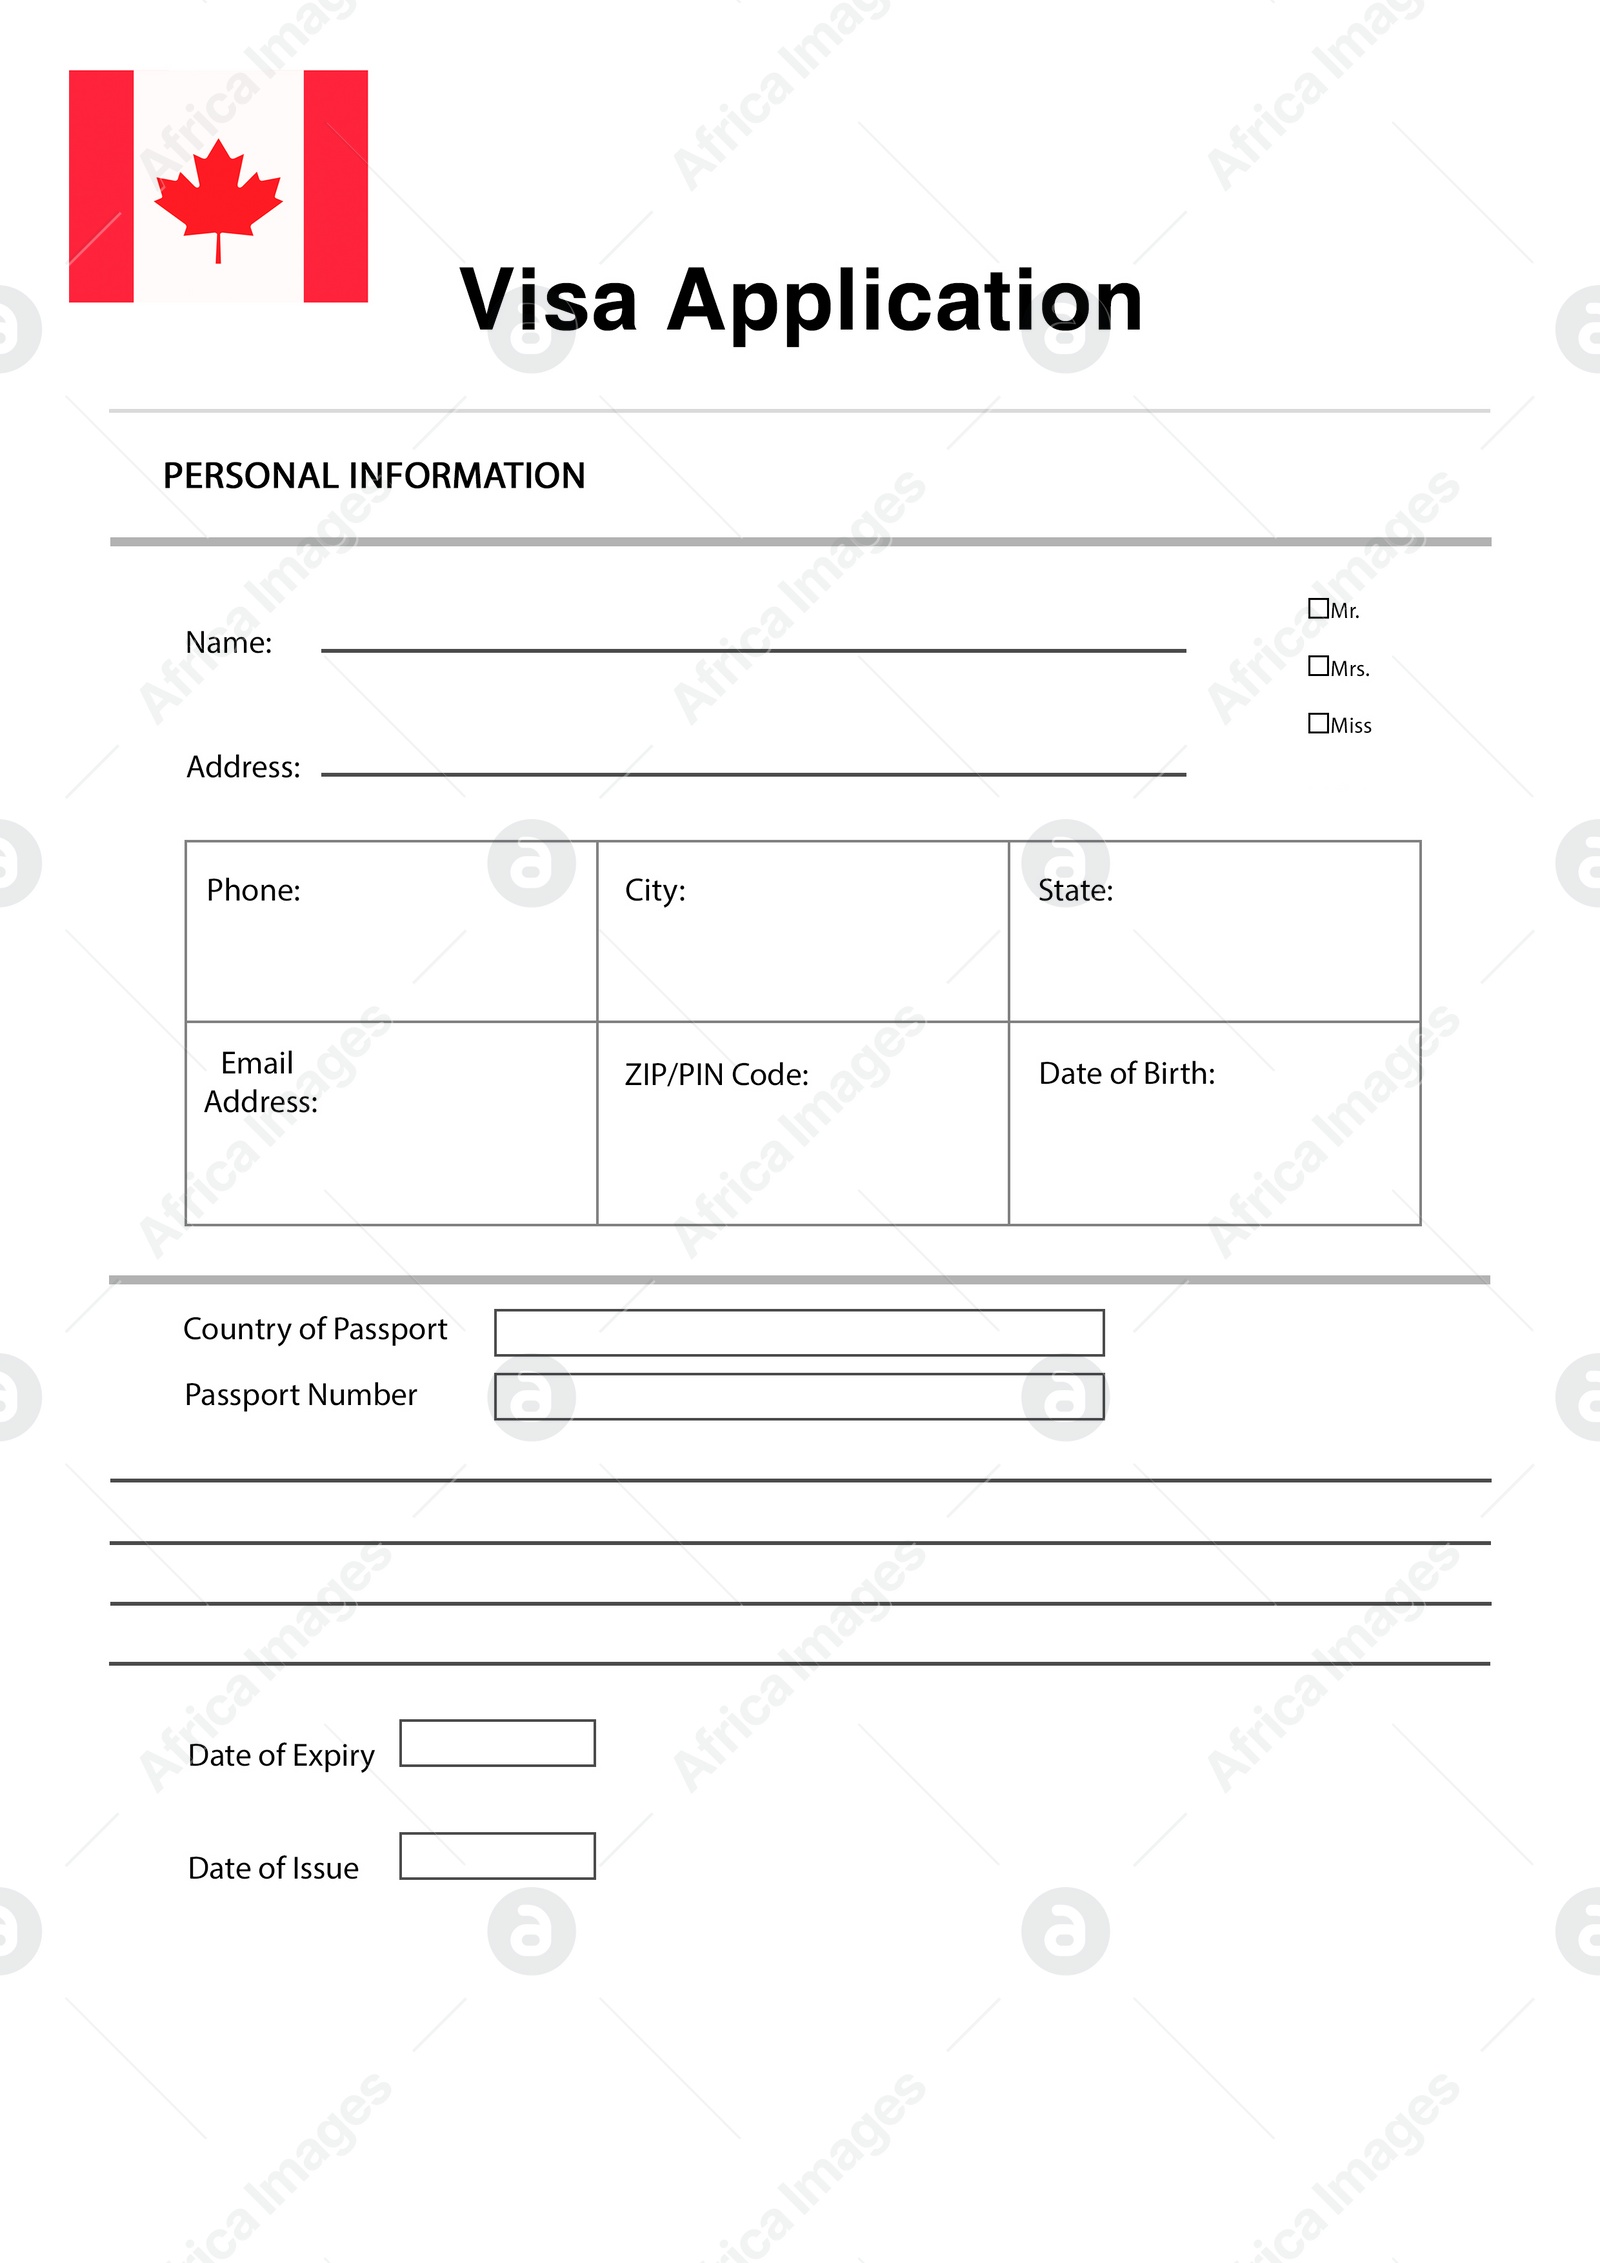 Illustration of Immigration to Canada. Blank application visa form